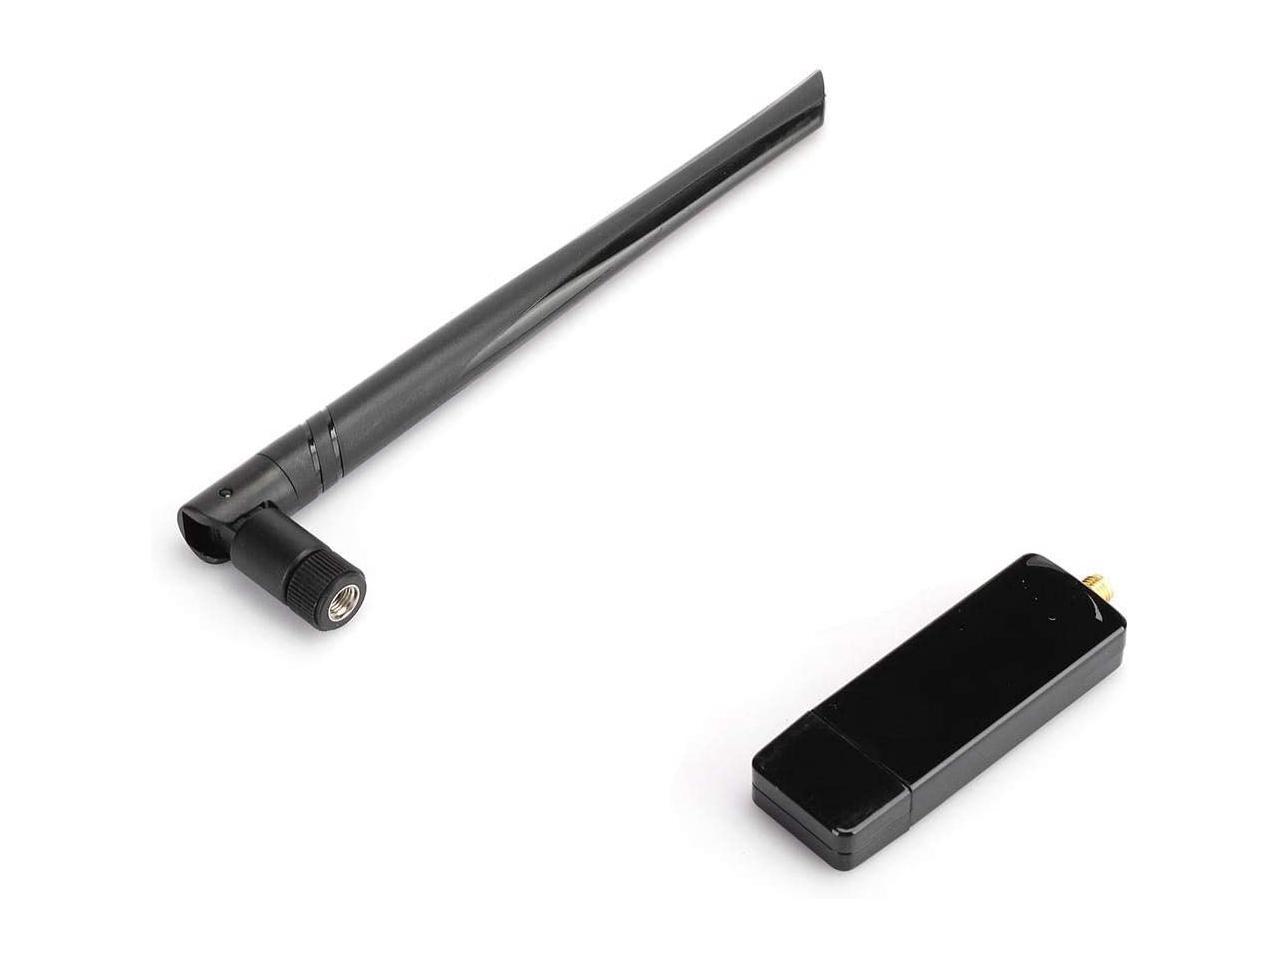 BSTUOKEY 2.4G&5G AC 600Mbps Wireless Adapter Dual Band USB WiFi Network Card with 2dBi Antenna 